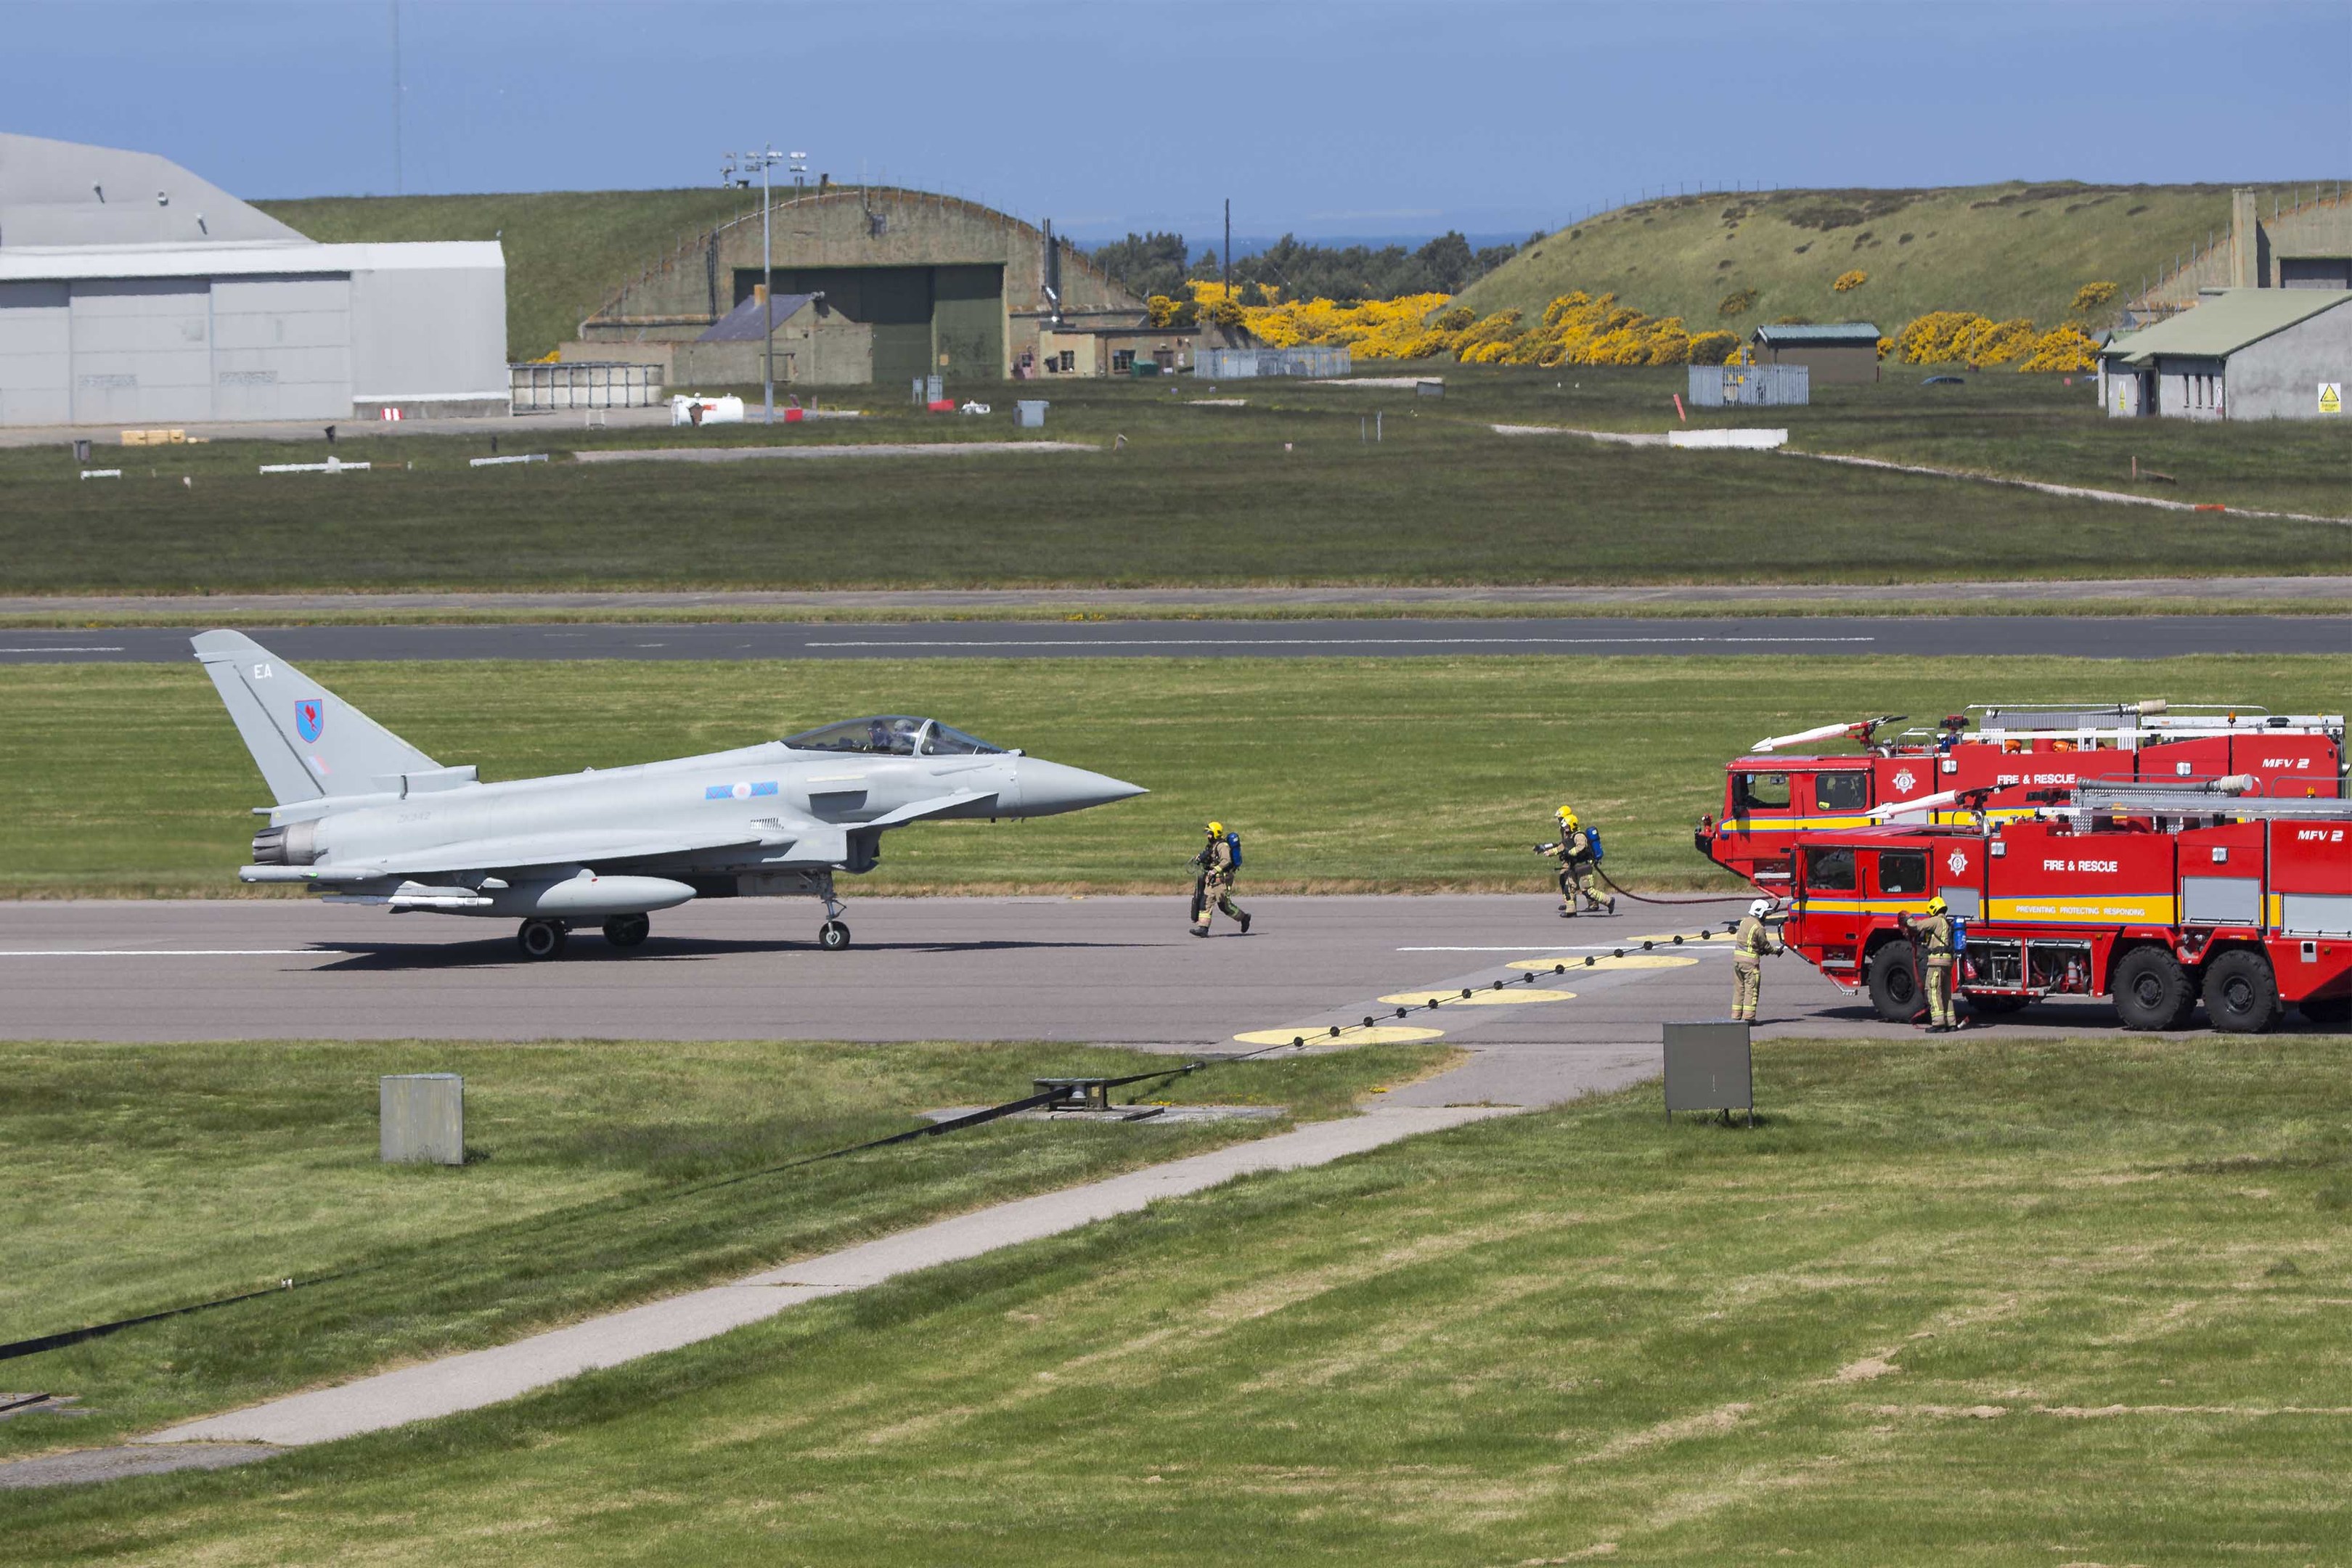 The Typhoon jet was met by fire engines after it landed at Kinloss.